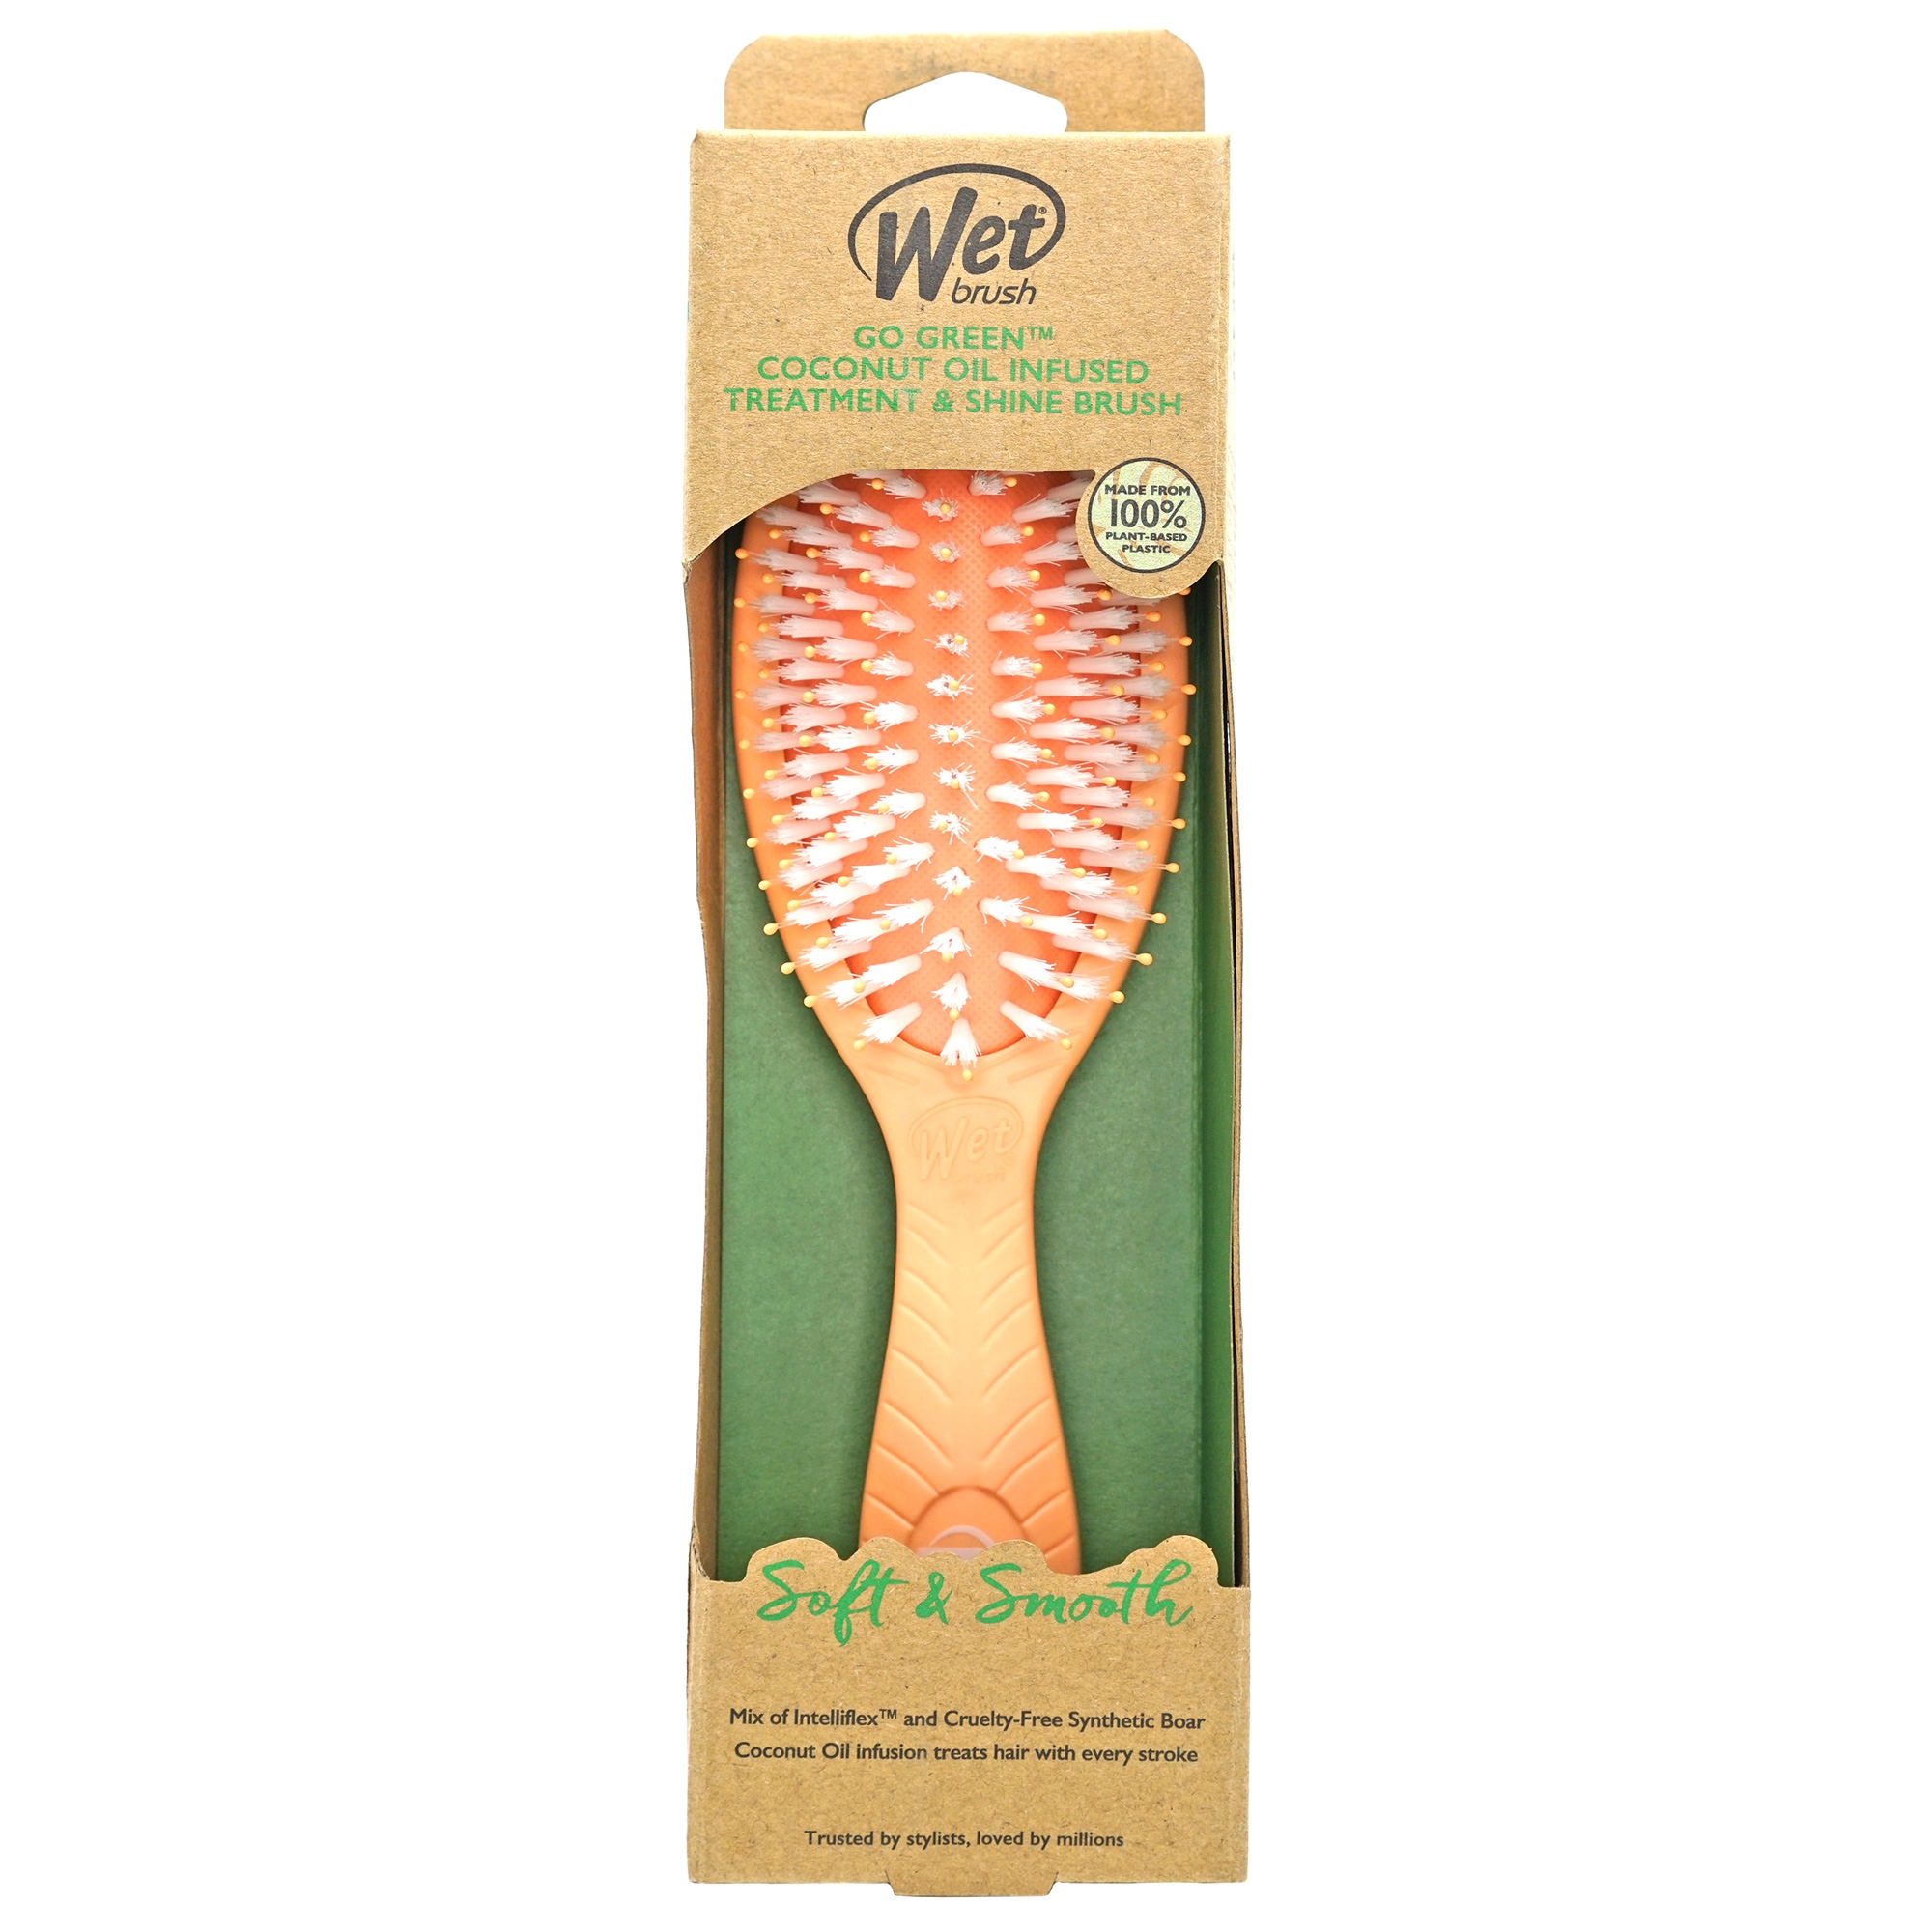 Wet Brush Go Green Treatment & Shine -  Infused for Impurities - Coconut Oil